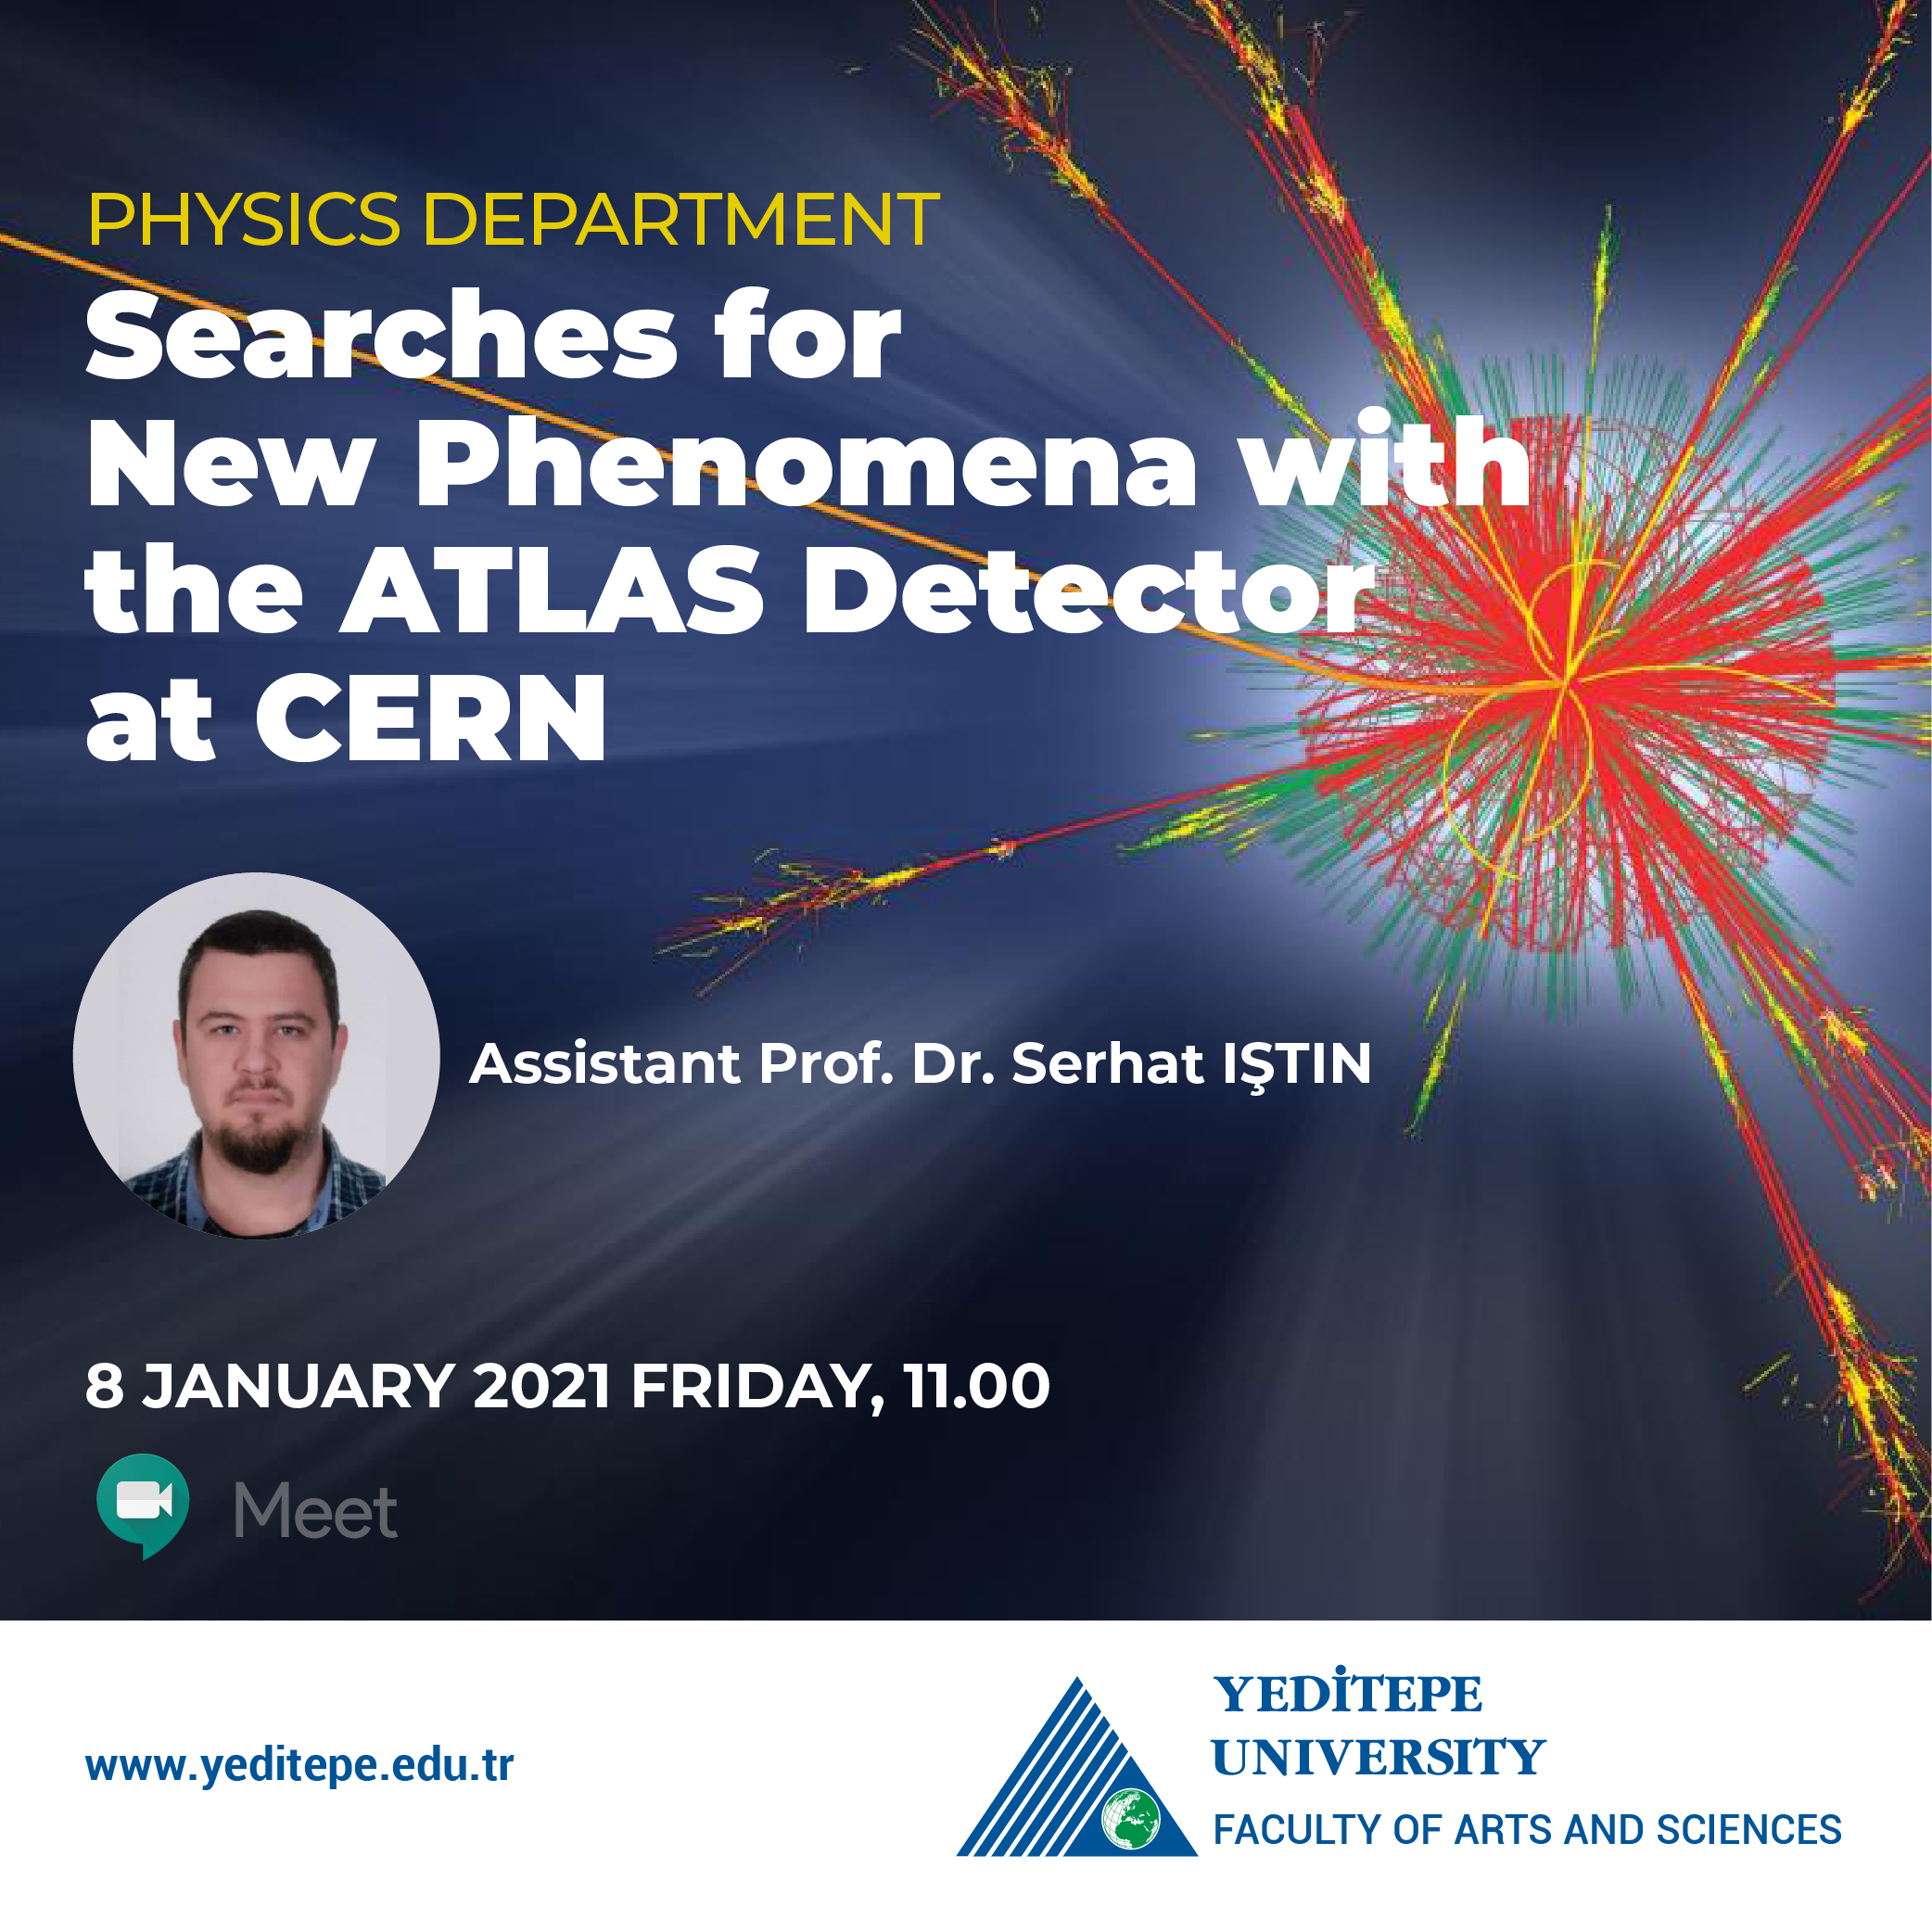 Searches for New Phenomena with the ATLAS Detector at CERN